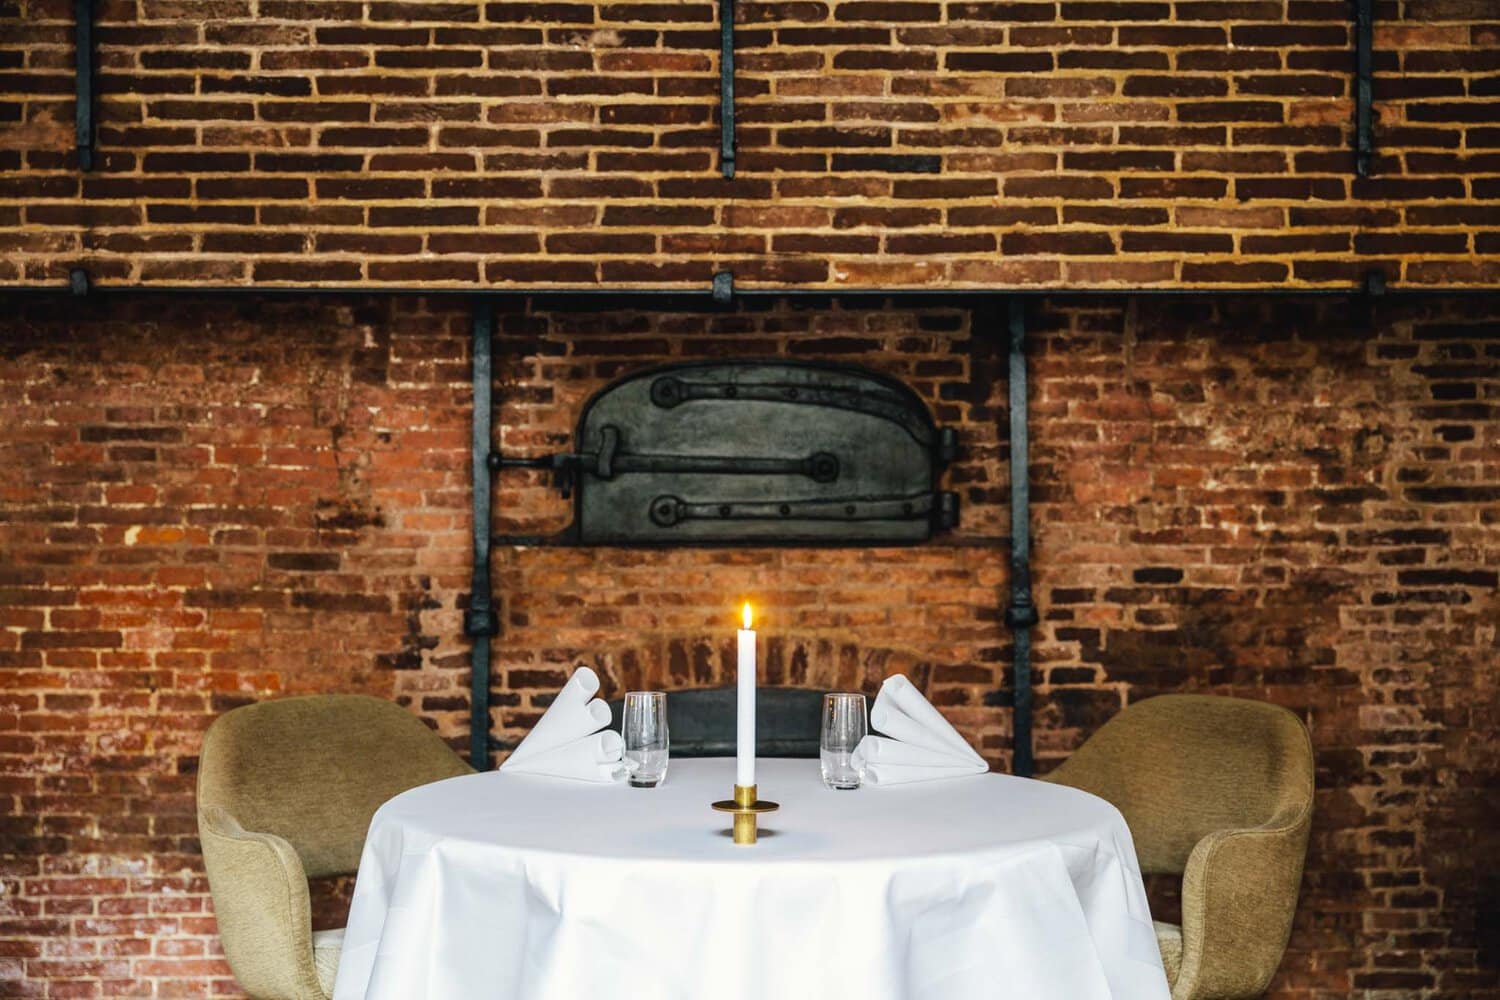 A set table in 2 Michelin Star Restaurant Vinkeles, in luxury boutique hotel The Dylan Amsterdam. The serviettes are folded, glasses are polished and the candles are lit.